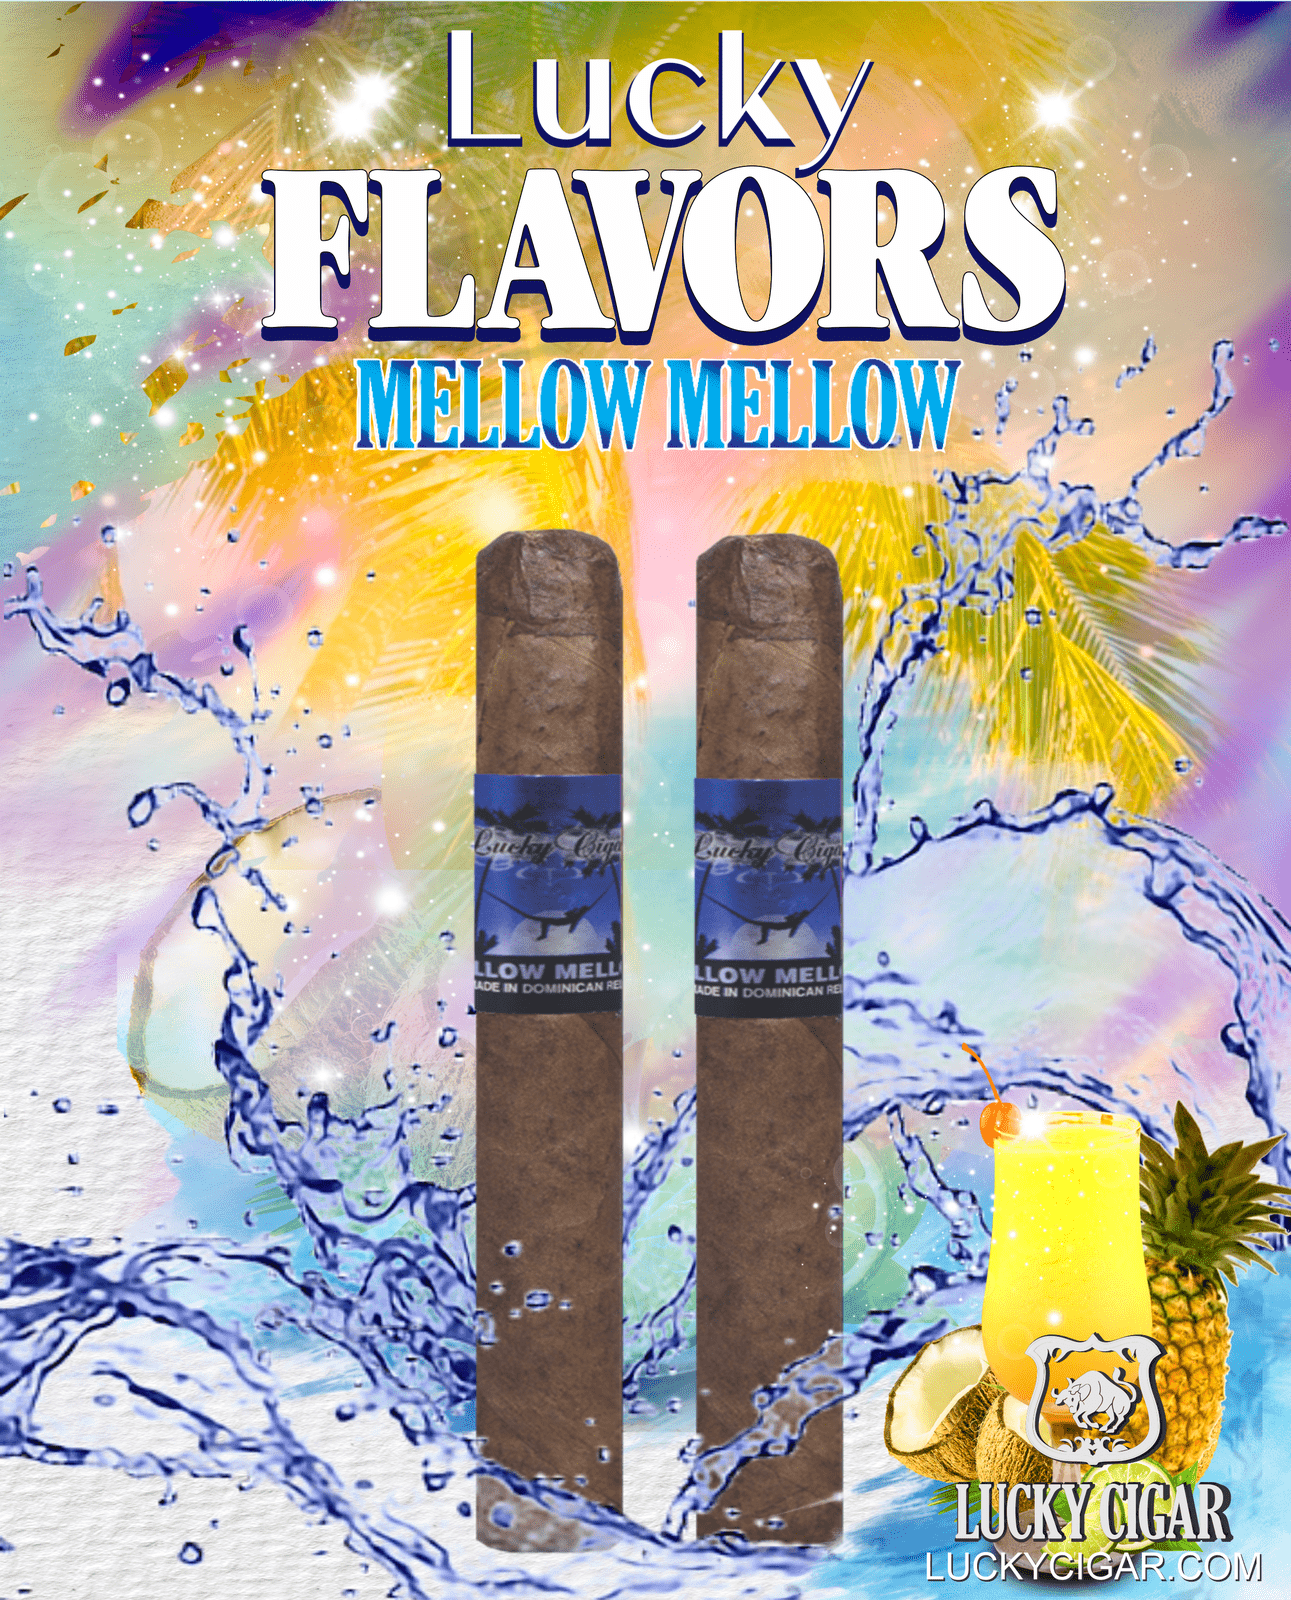 Flavored Cigars: Lucky Flavors 2 Mellow Mellow 5x42 Cigars